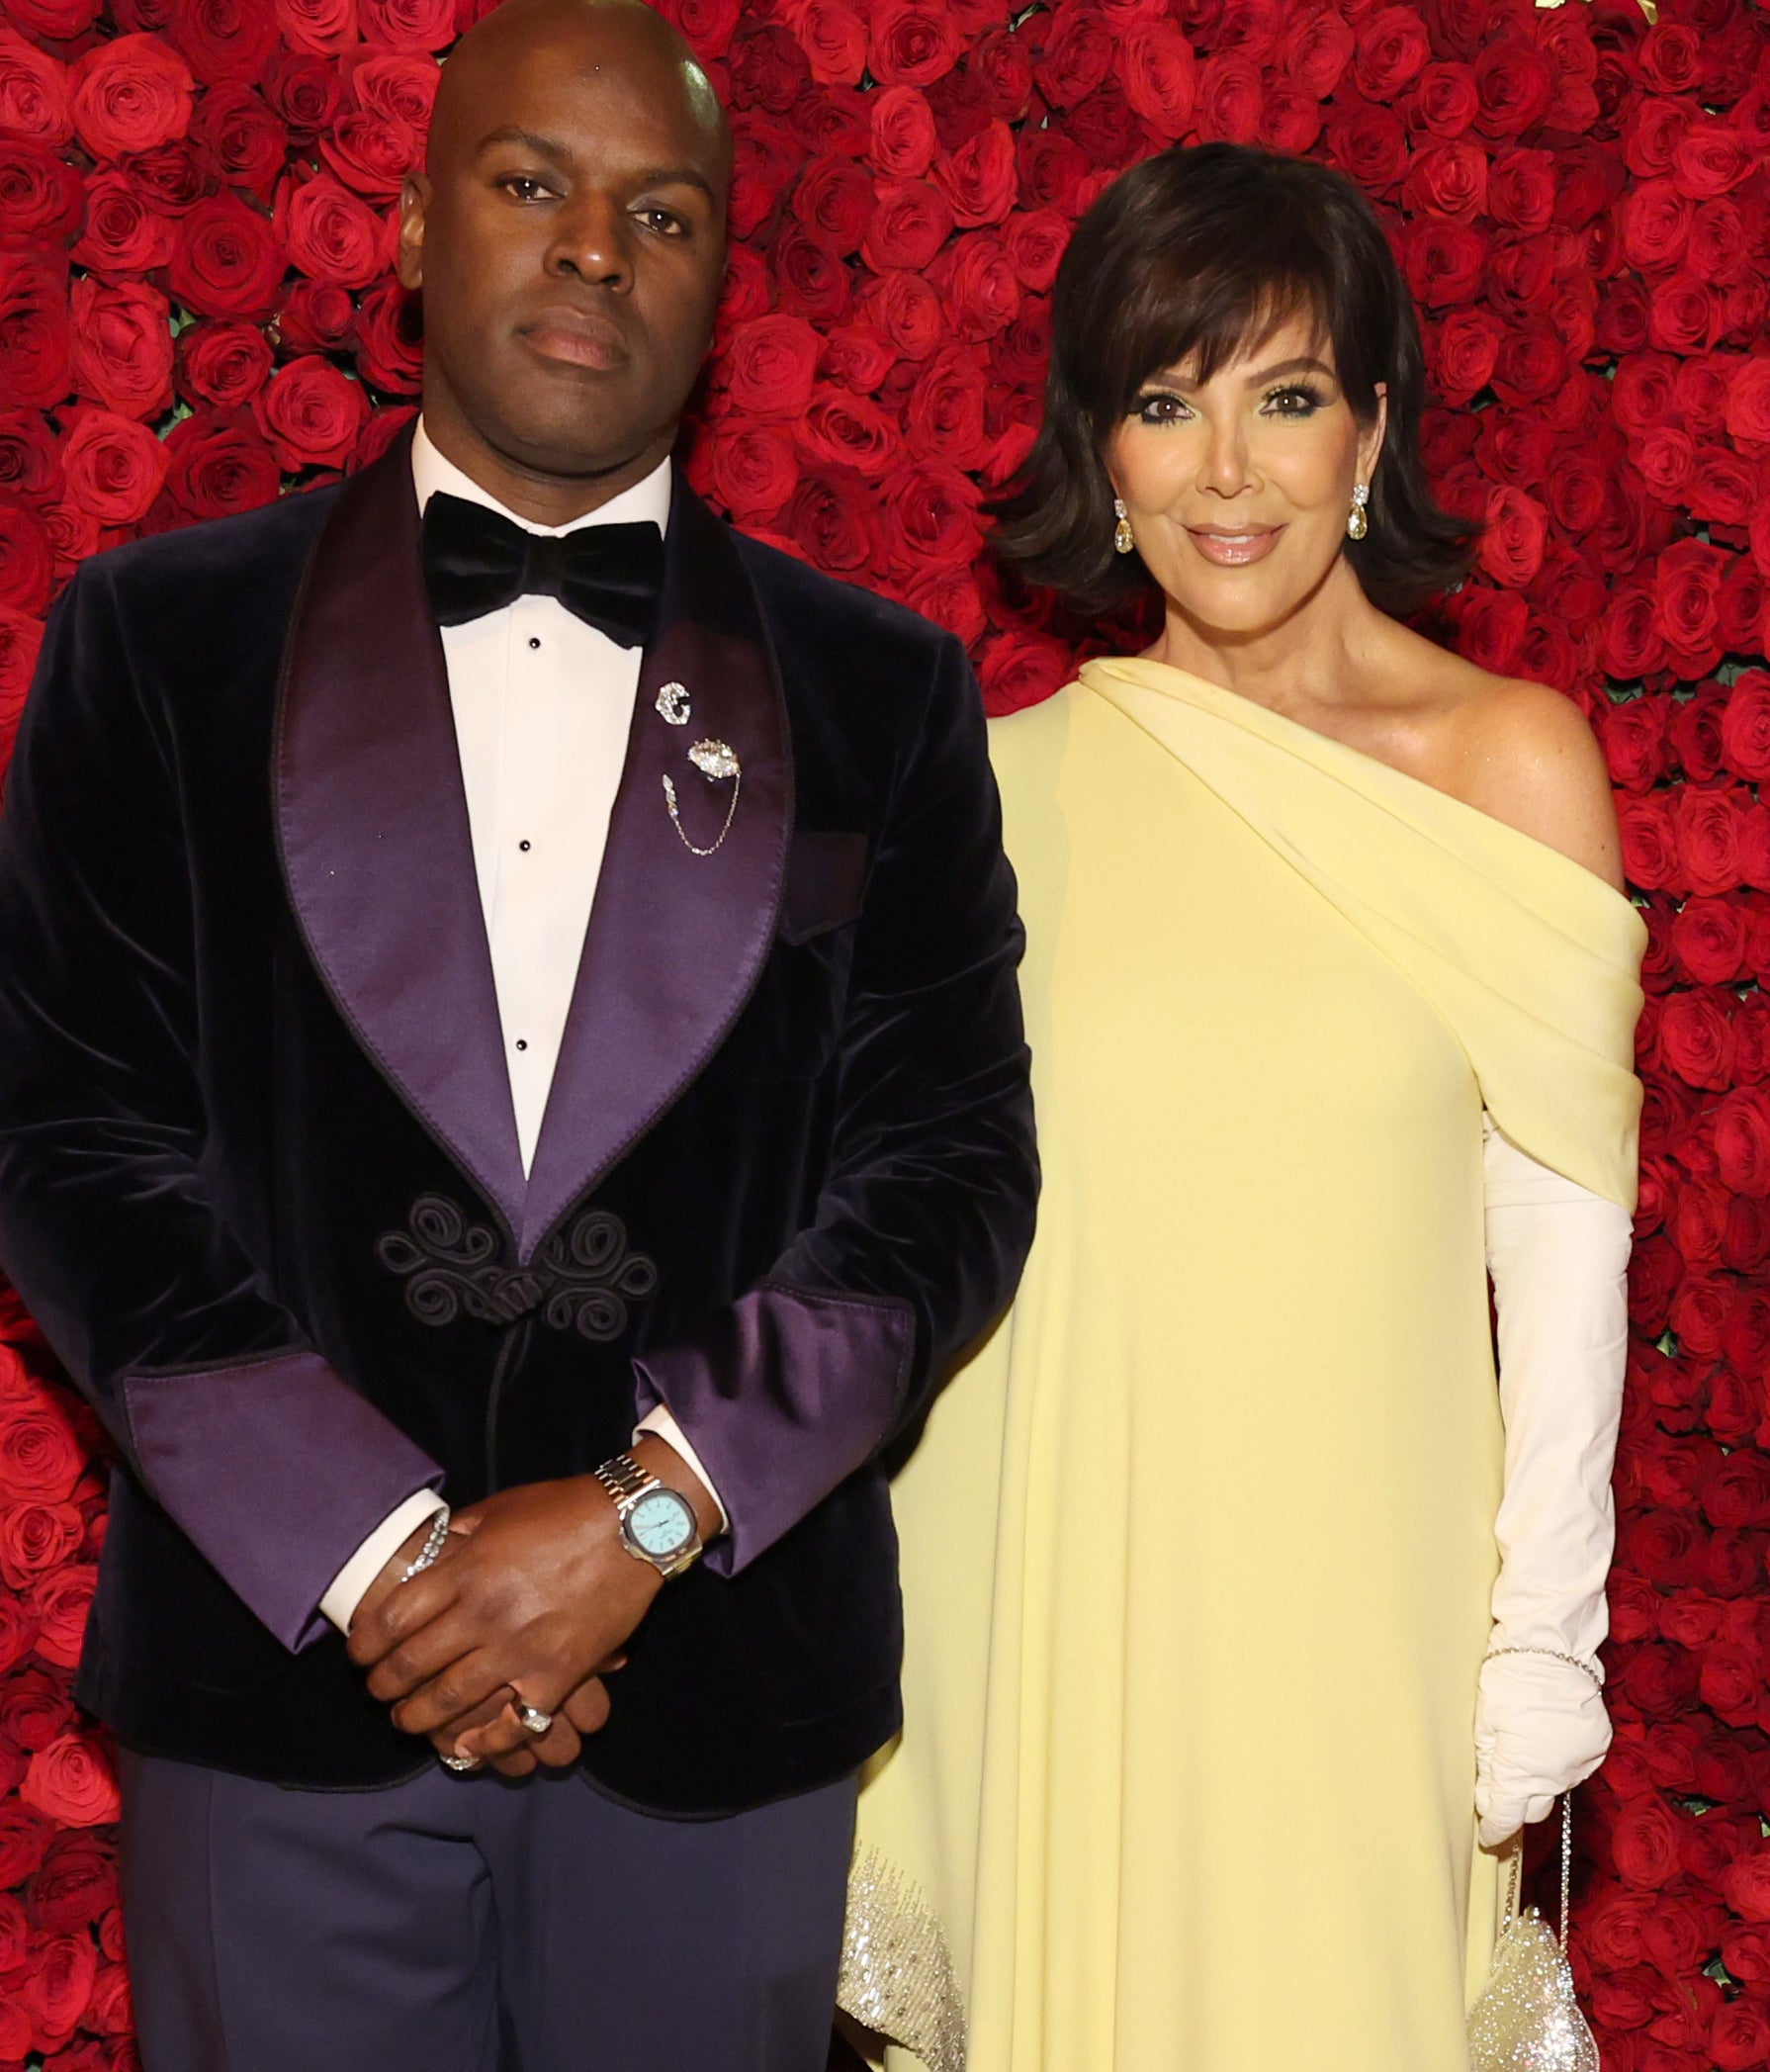 Two celebrities pose together; one in a velvet tuxedo and the other in a one-shoulder gown